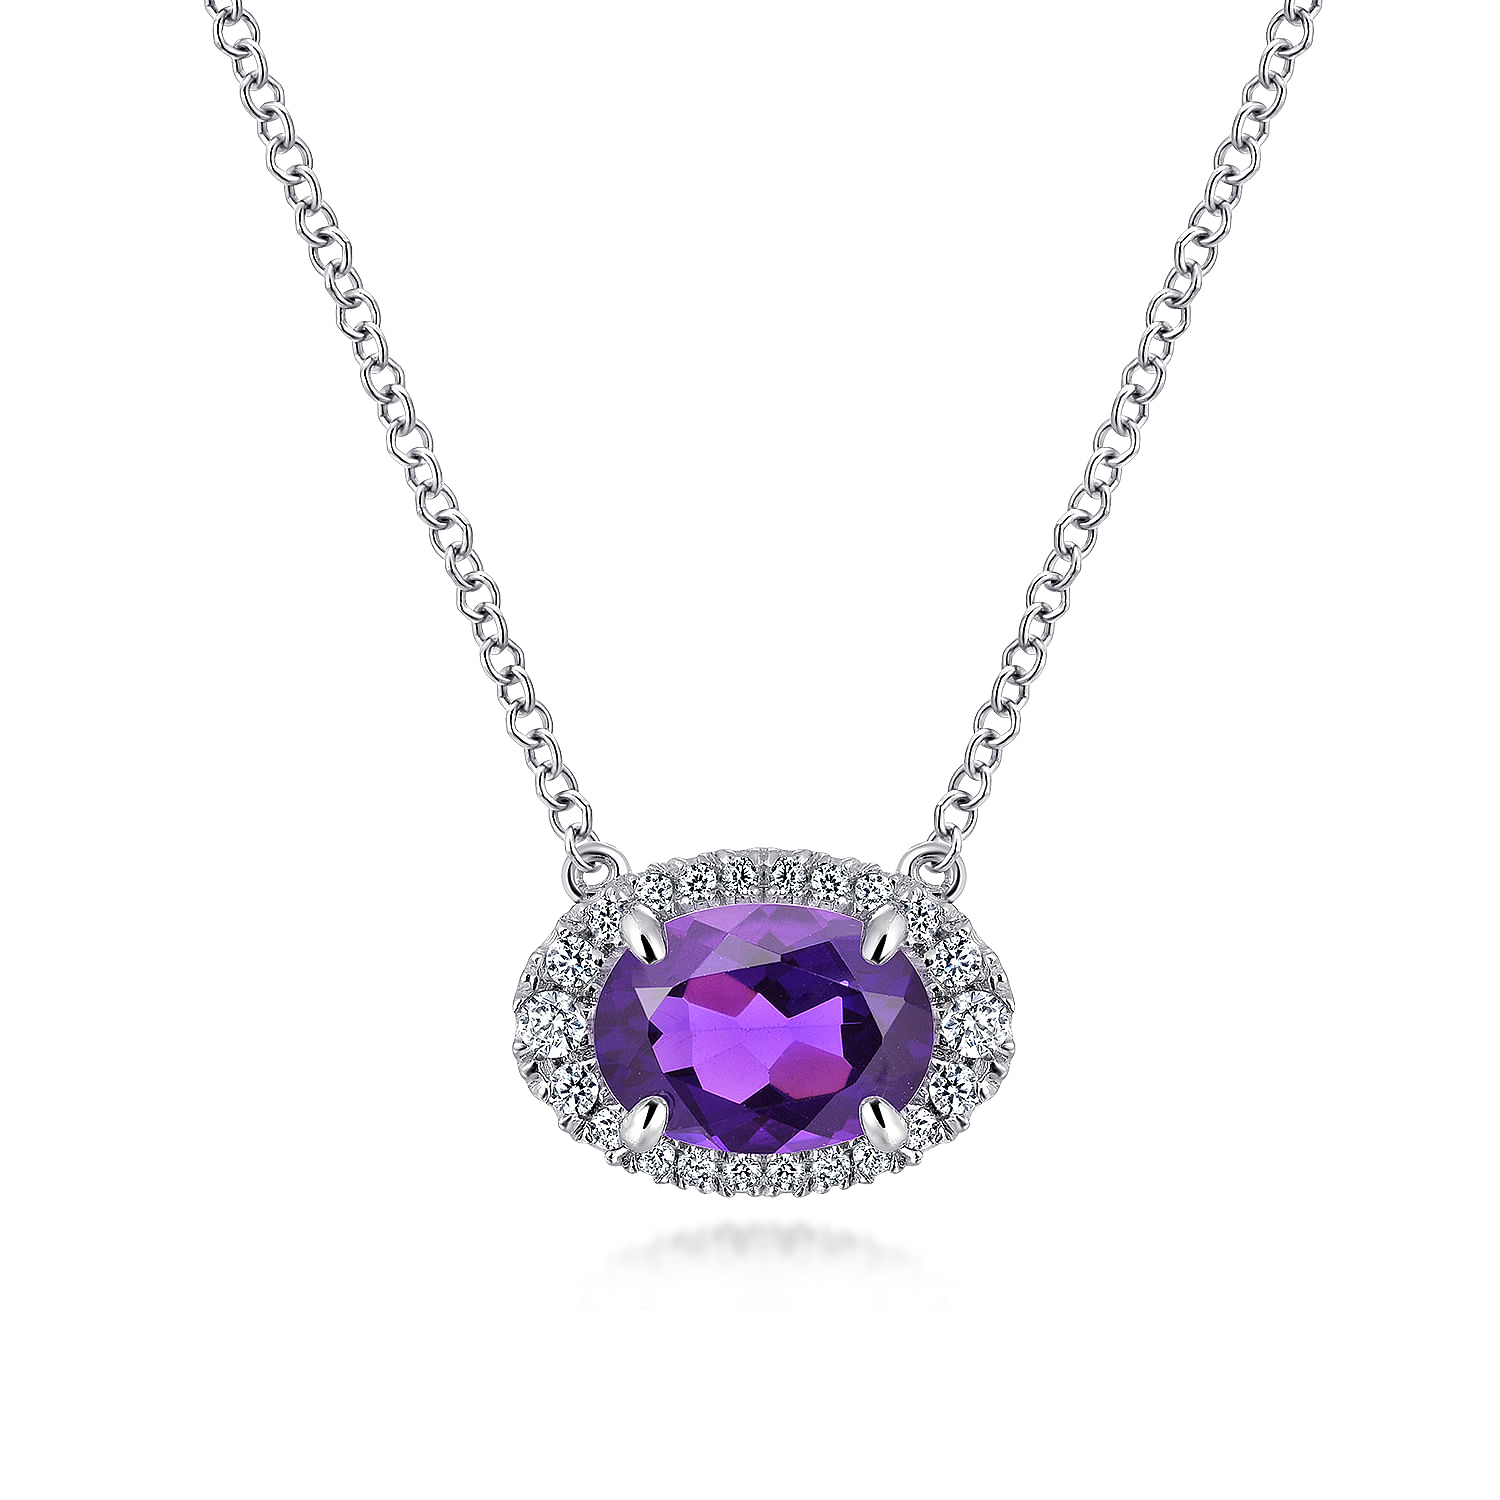 14K White Gold Oval Amethyst and Diamond Halo Pendant Necklace